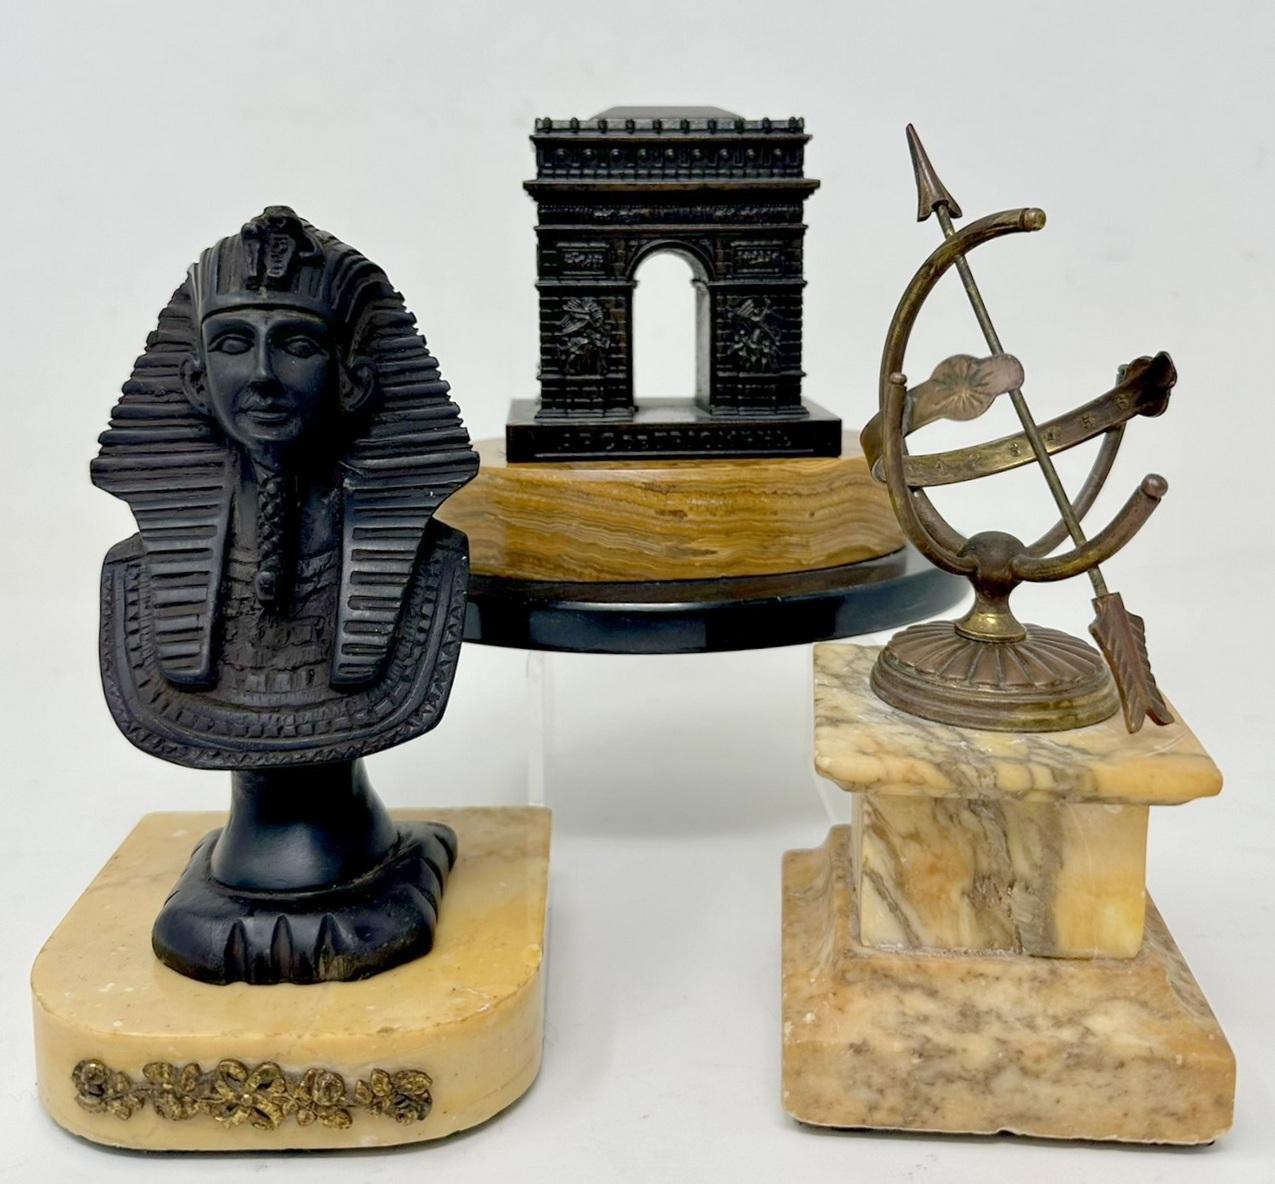 Stunning Antique Grand Tour Collection of Patinated Bronze and Marble items to include a miniature Sundial superbly mounted on a Sienna Marble base. 

A black basalt ceramic Egyptian Bust on its original Marble base and a miniature version of the